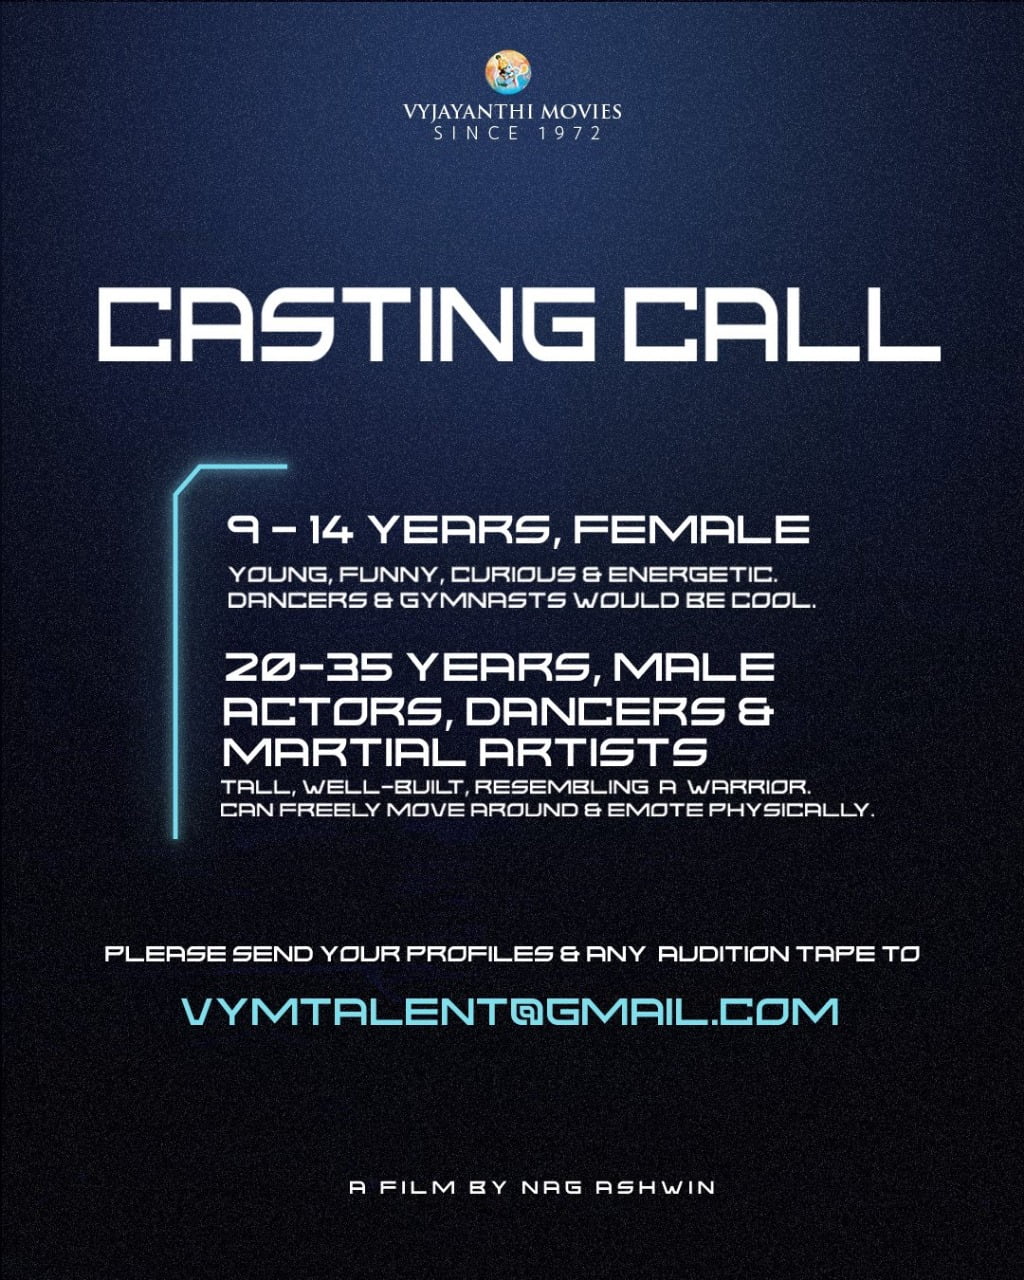 Prabhas :  Don't Miss: Does Prabhas want to act in a movie? Auditions in progress Send your details to this mail id